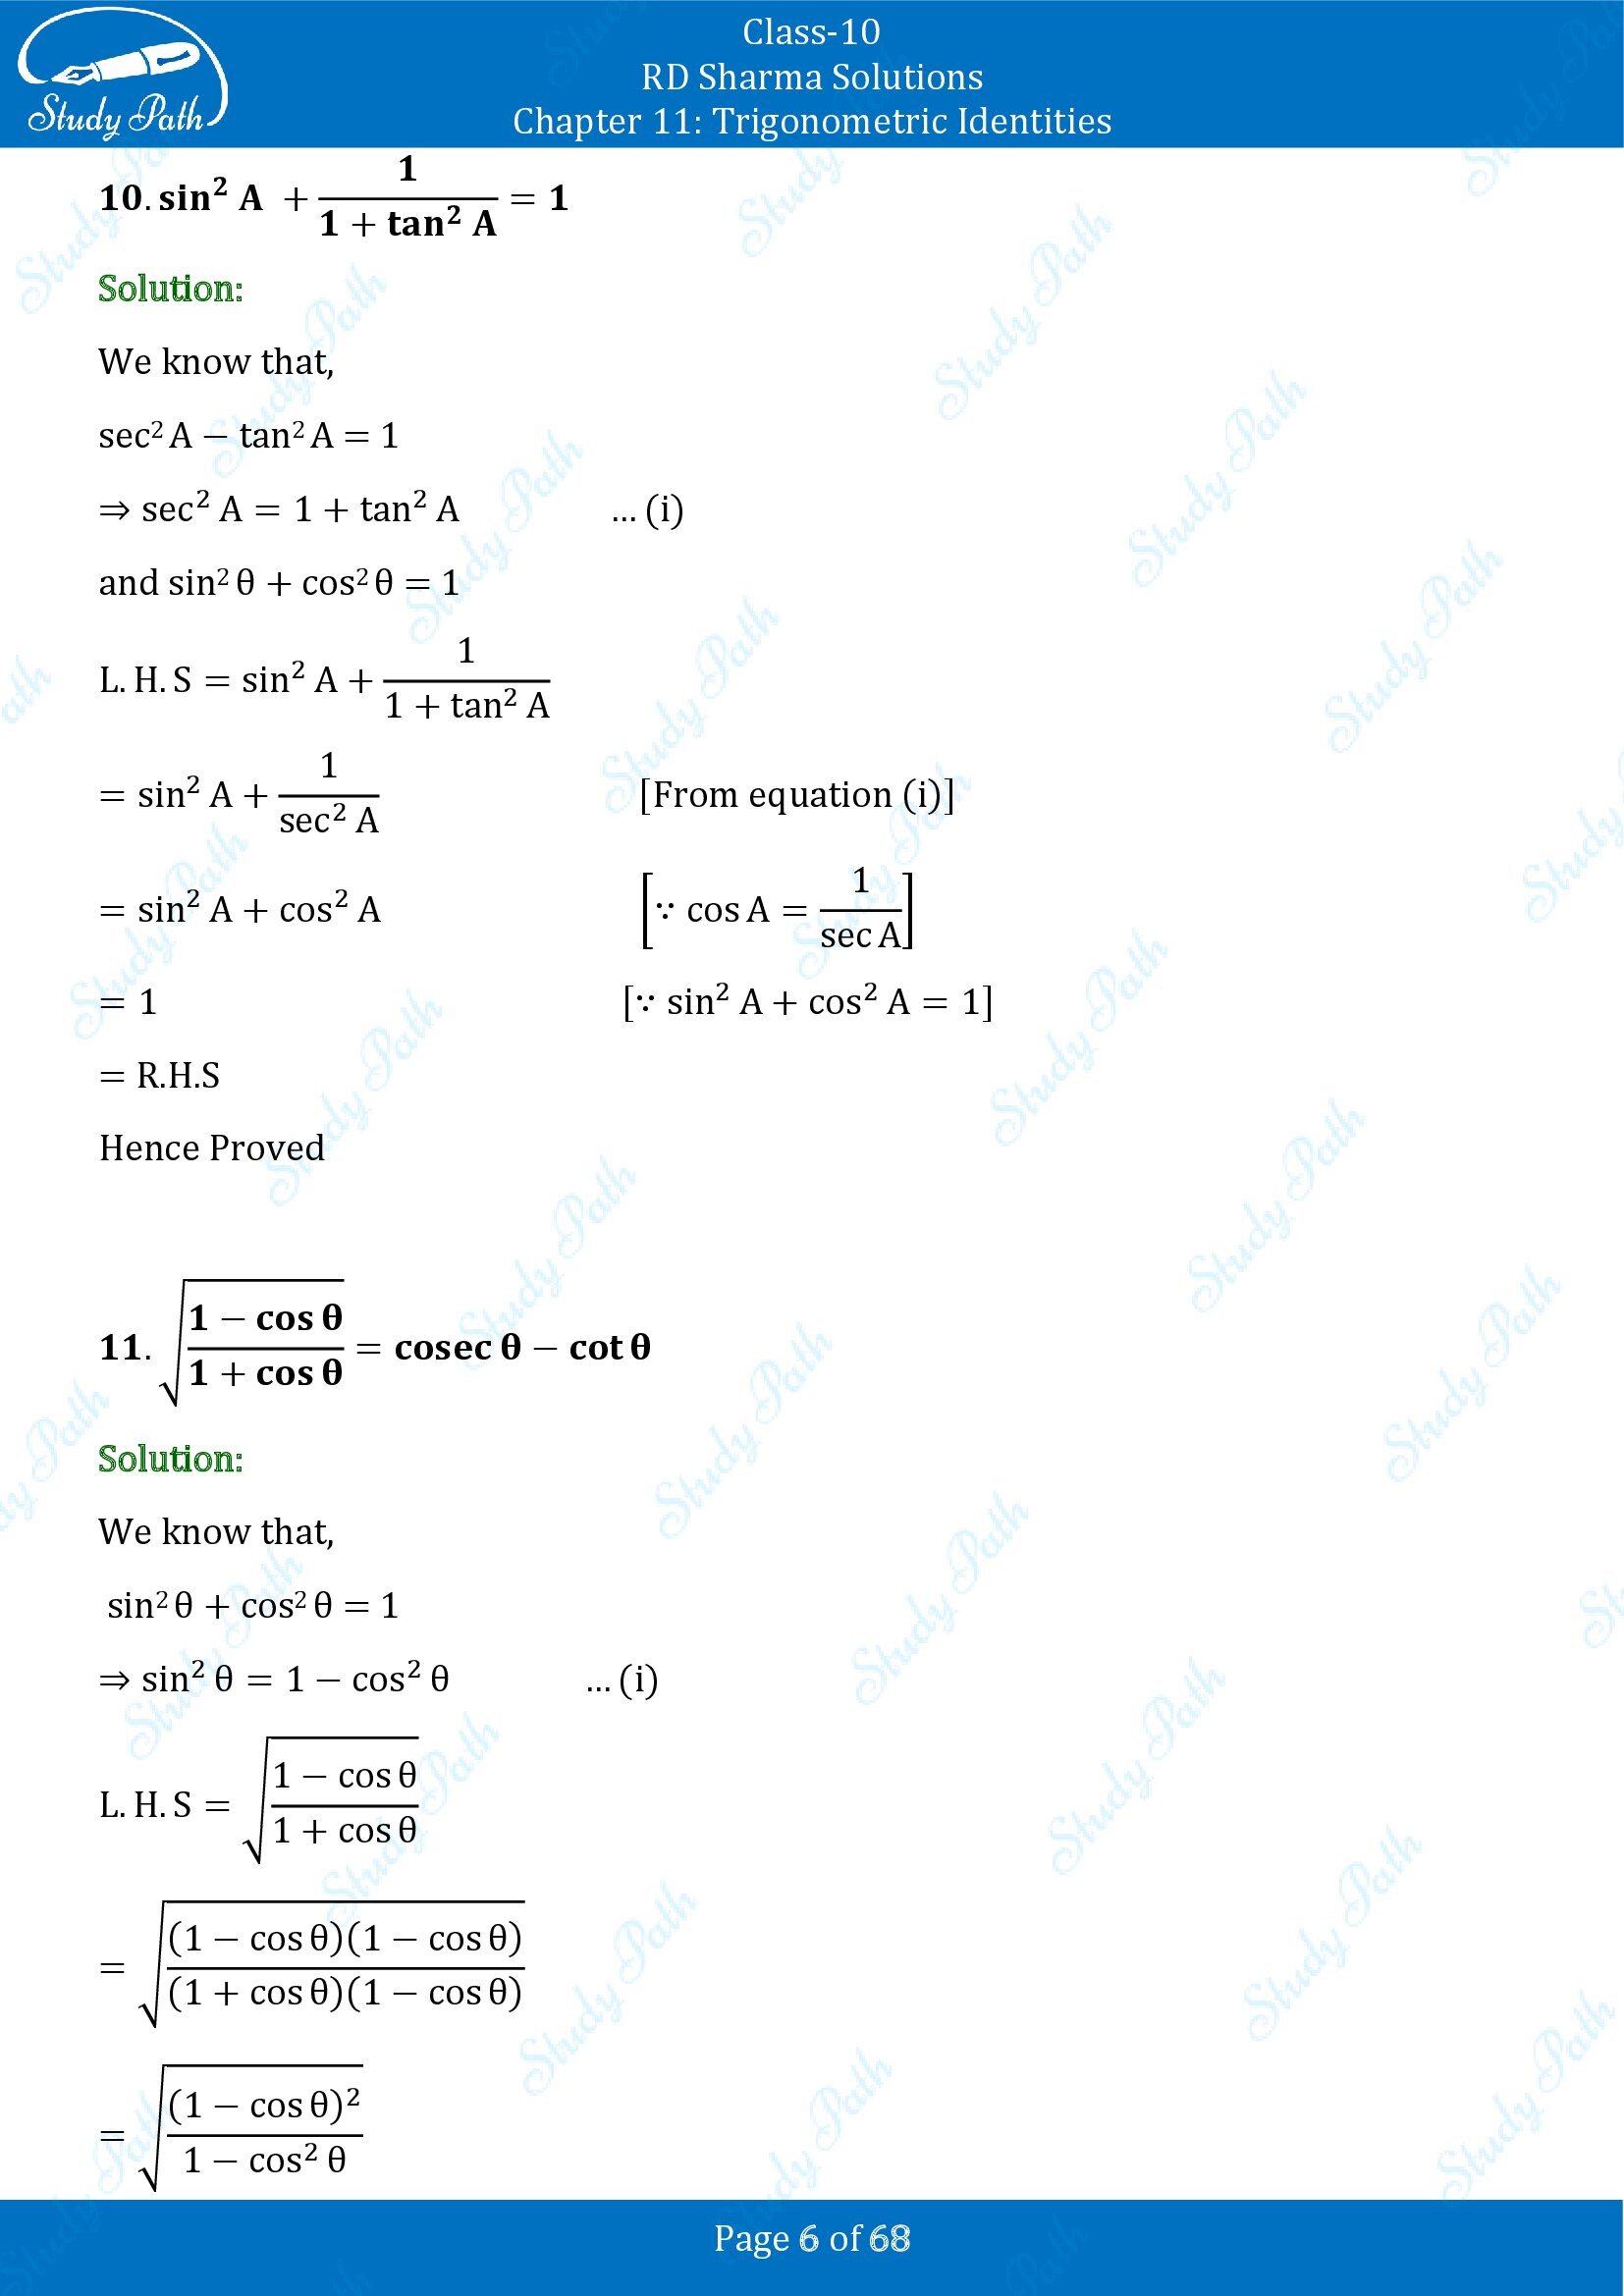 RD Sharma Solutions Class 10 Chapter 11 Trigonometric Identities Exercise 11.1 00006